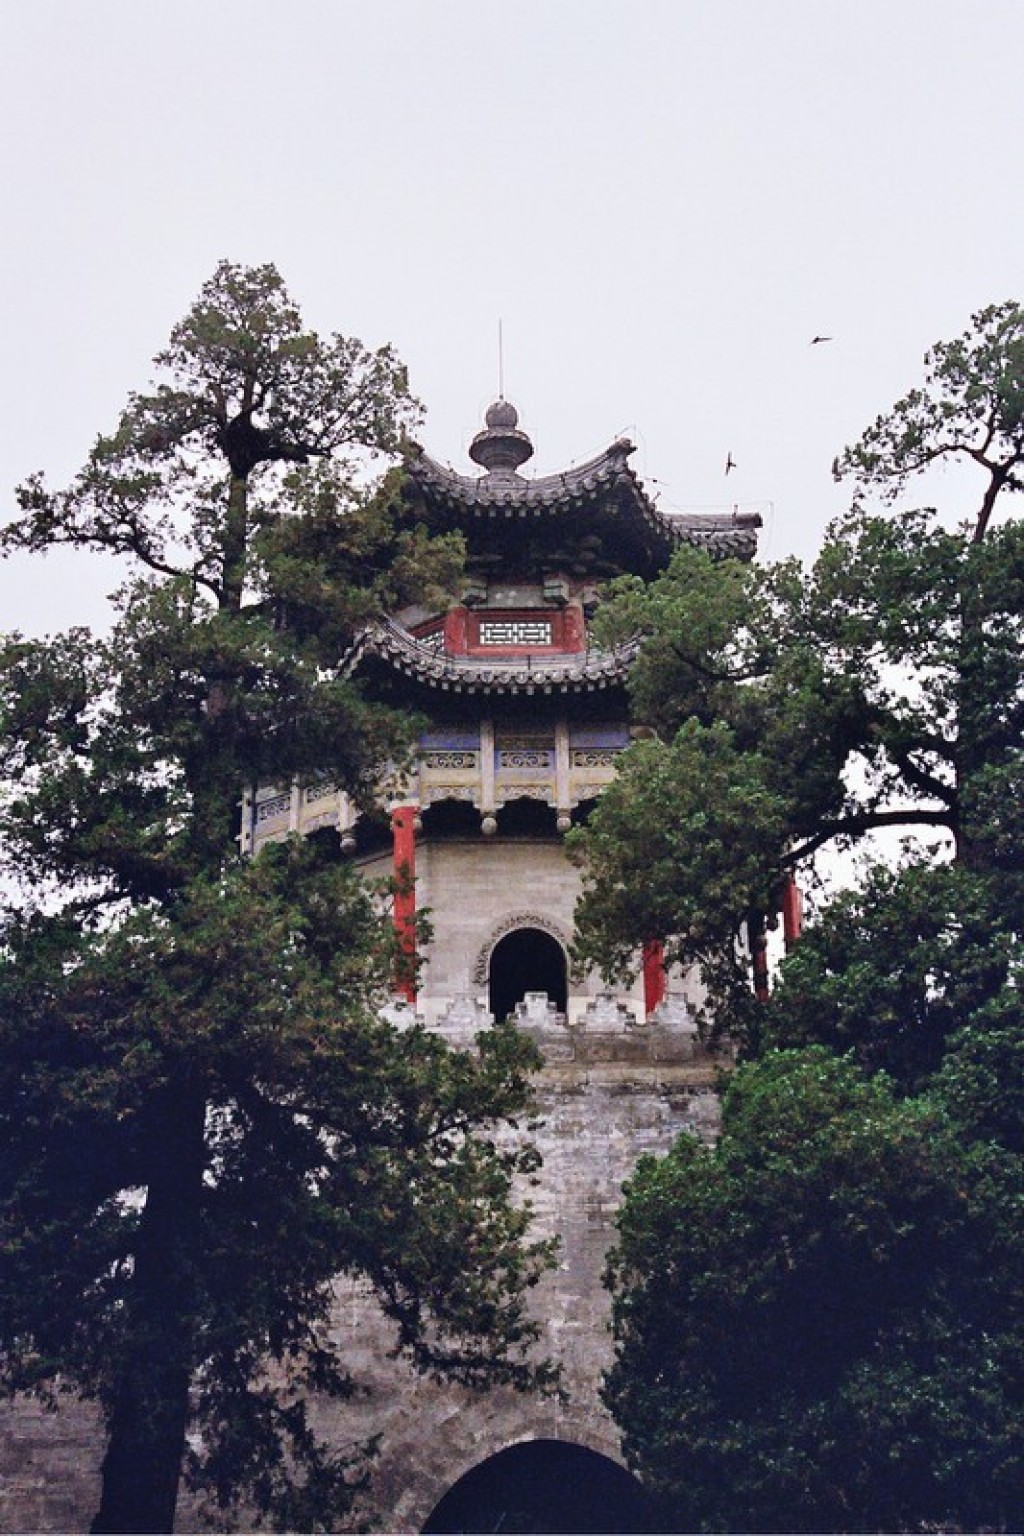 Just on the outskirts of Beijing, the Summer Palace is a beautiful place to explore for a day.
